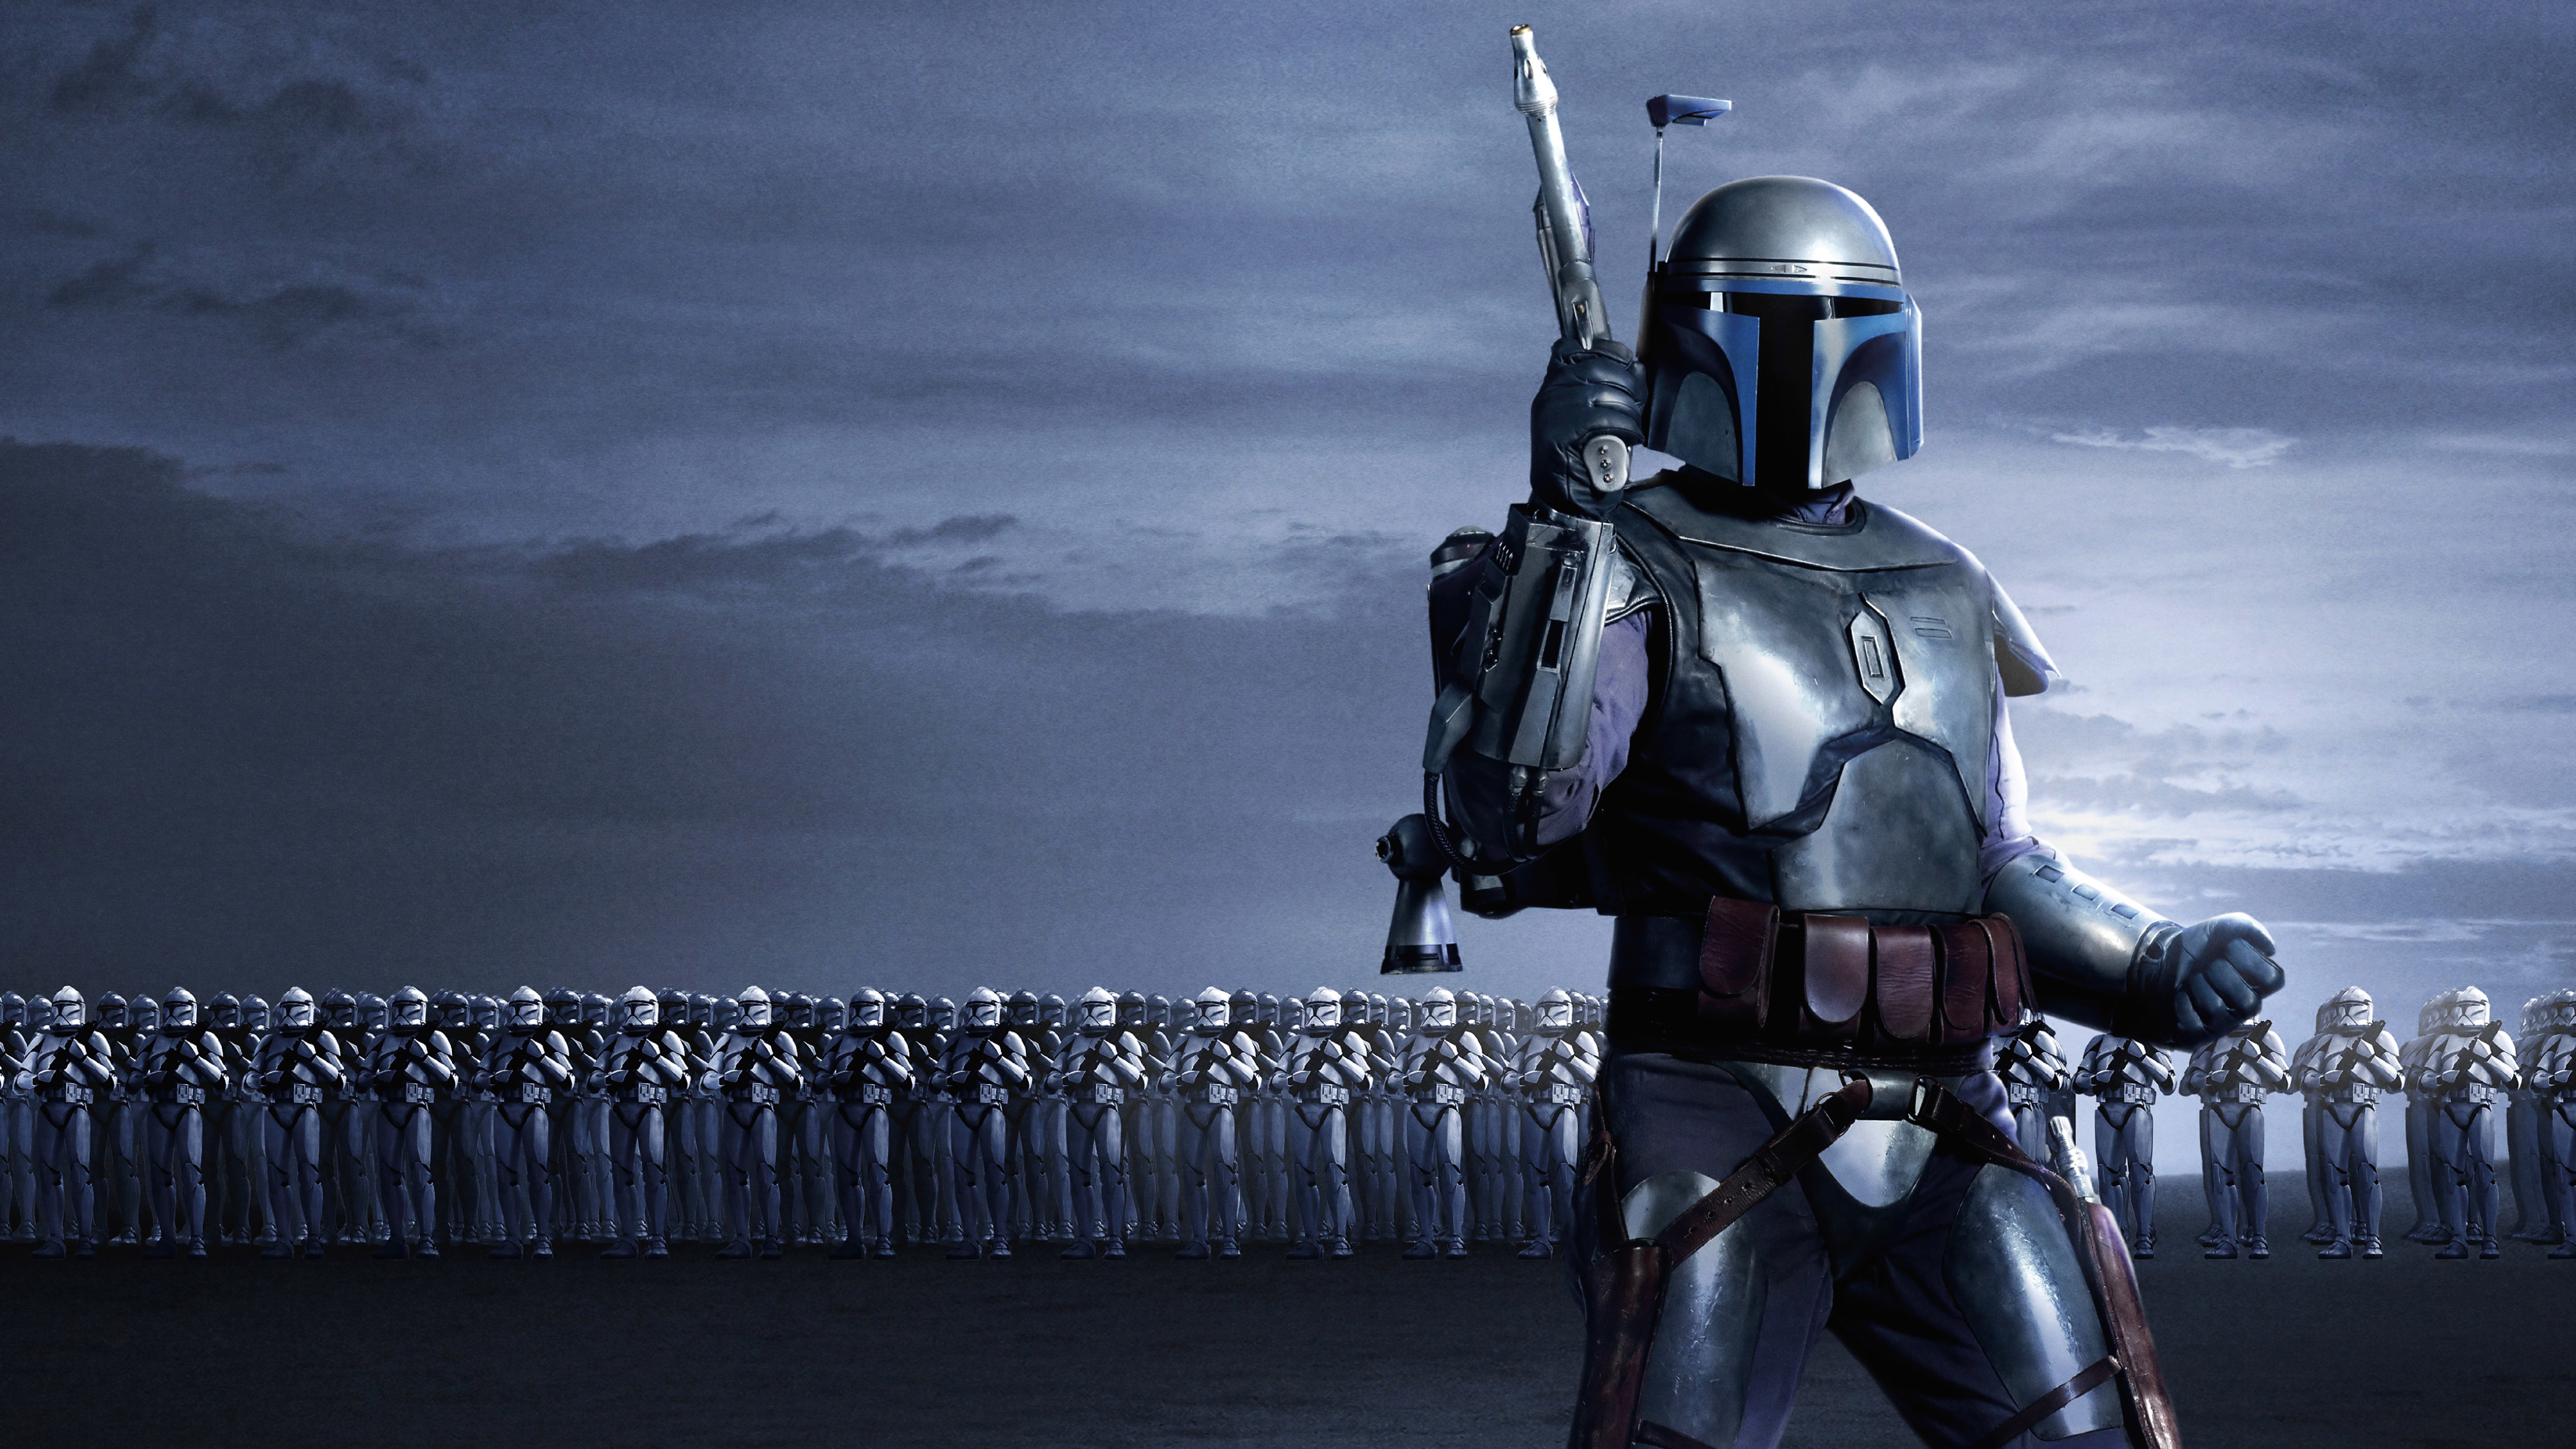 51x Jango Fett 5k Star Wars 5k Wallpaper Hd Movies 4k Wallpapers Images Photos And Background Wallpapers Den